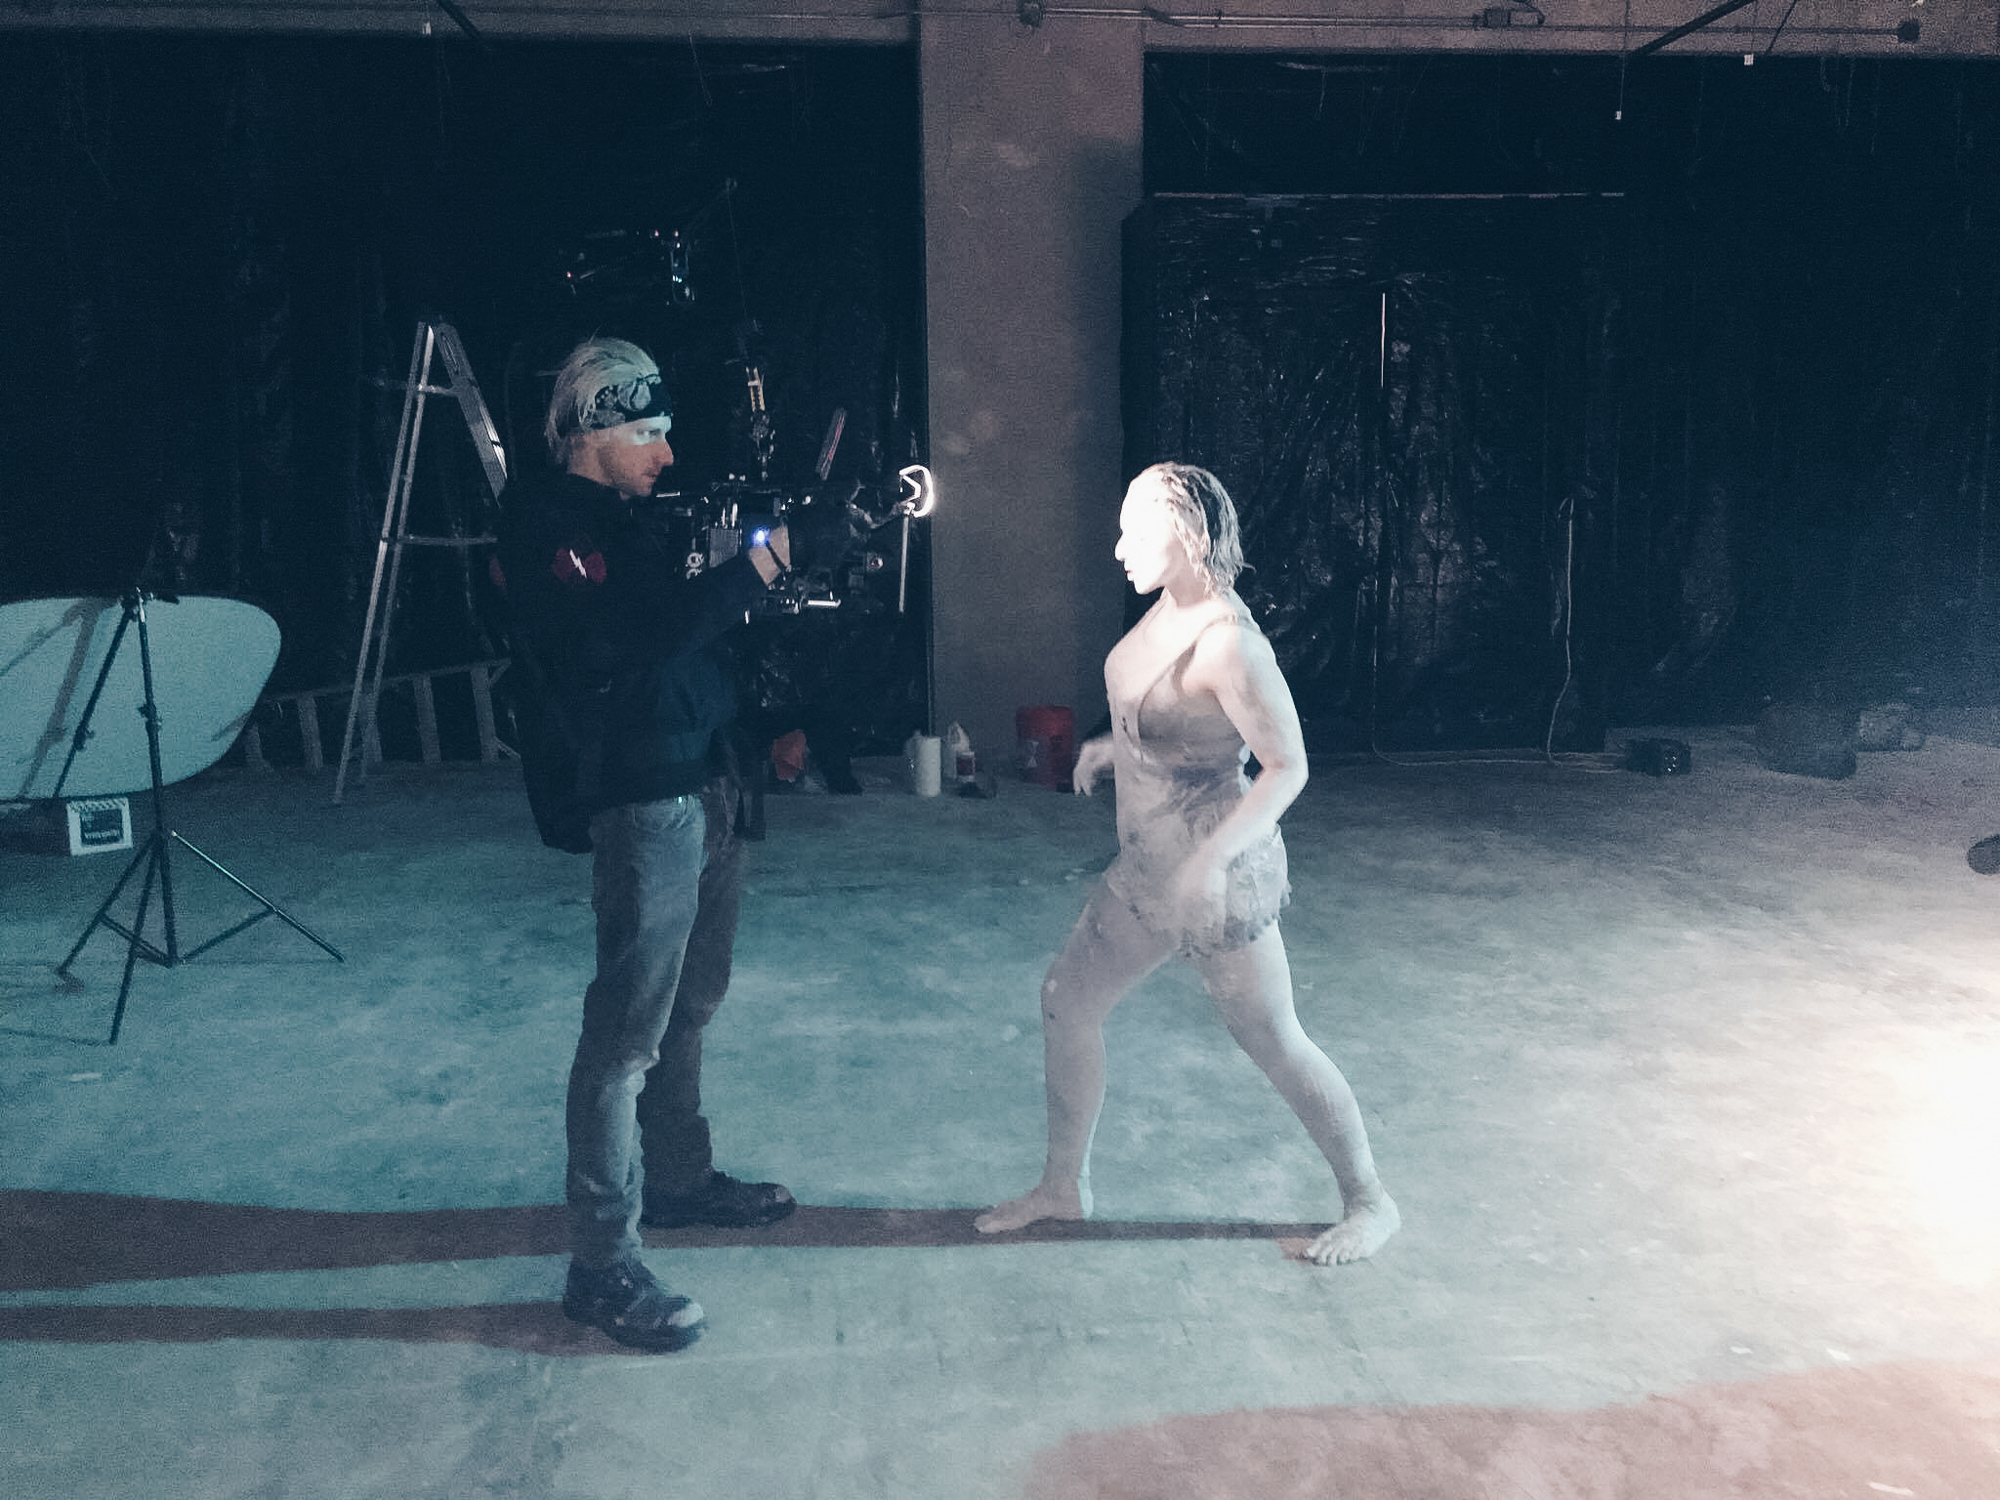 Man uses easyrig attached to camera to record a woman covered in white mud in dark room for a music video.